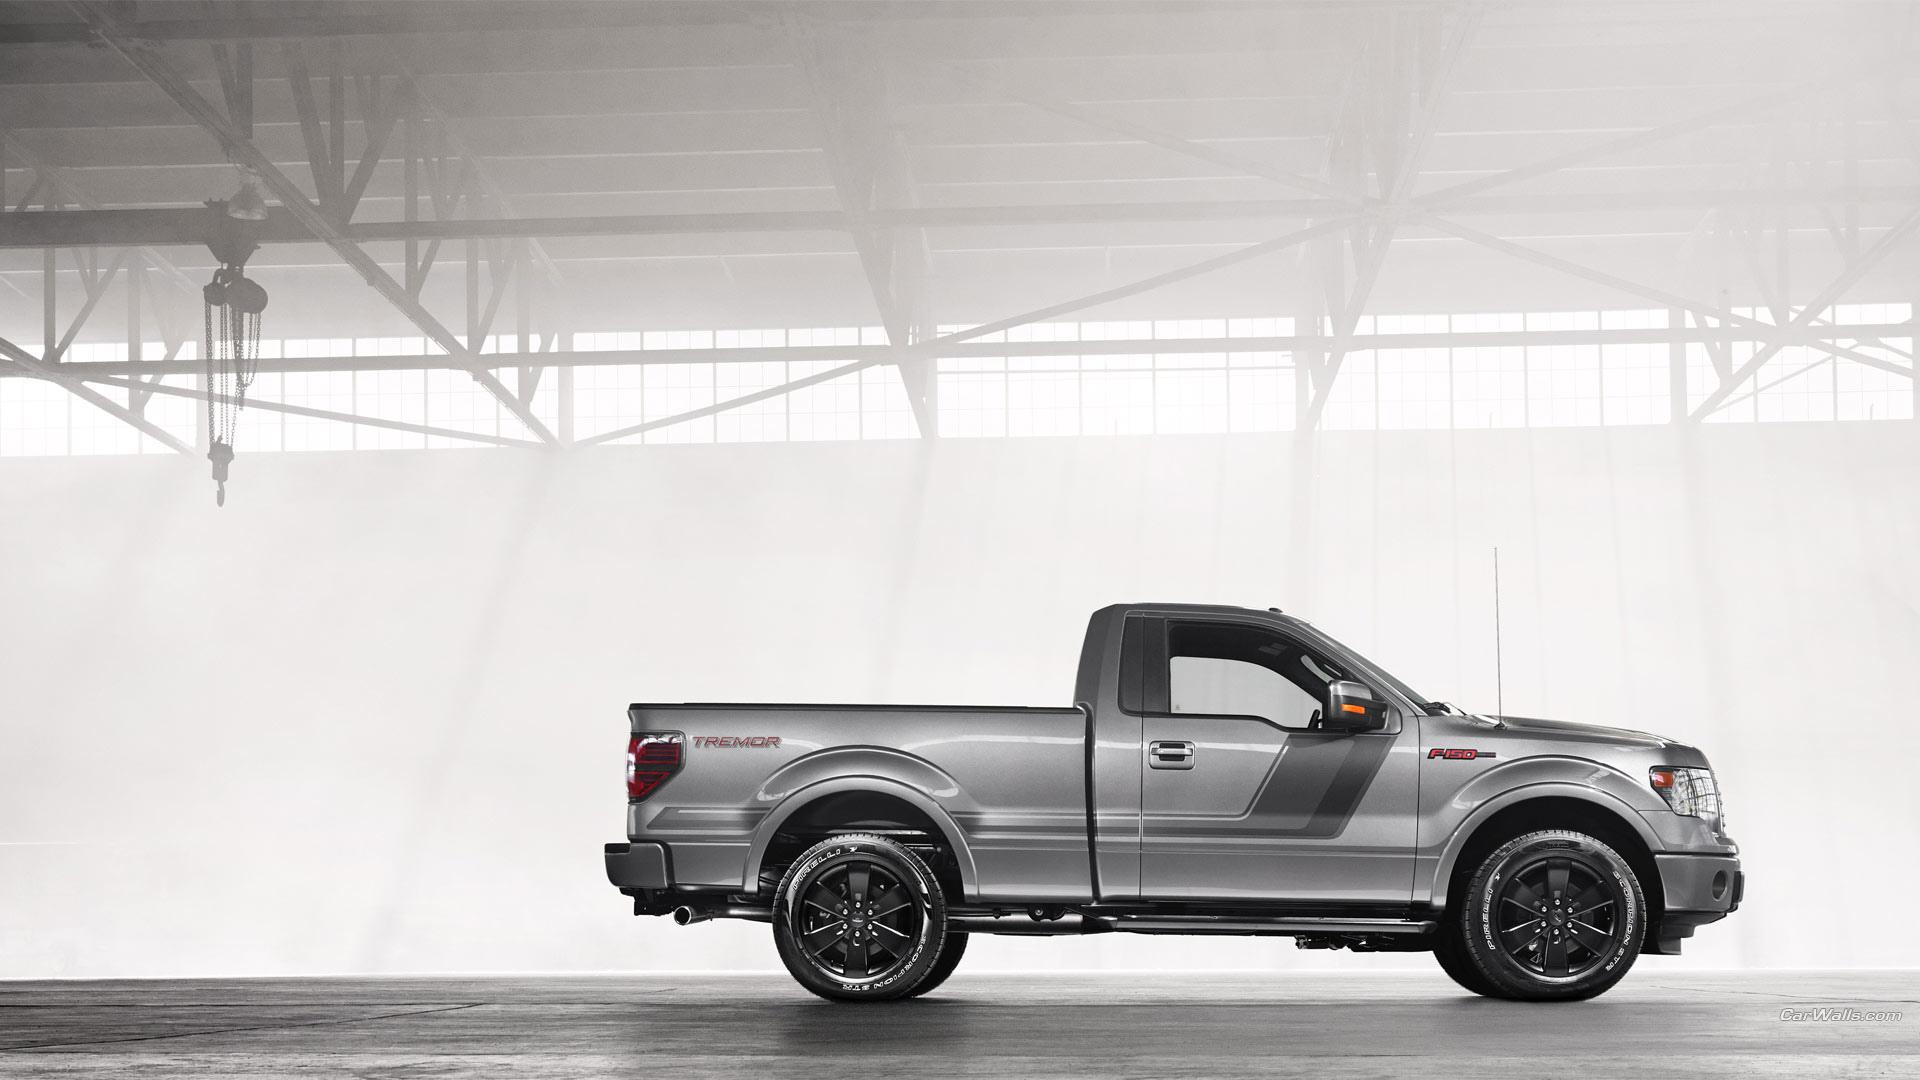 2014 Ford F-150 Tremor wallpapers HD quality